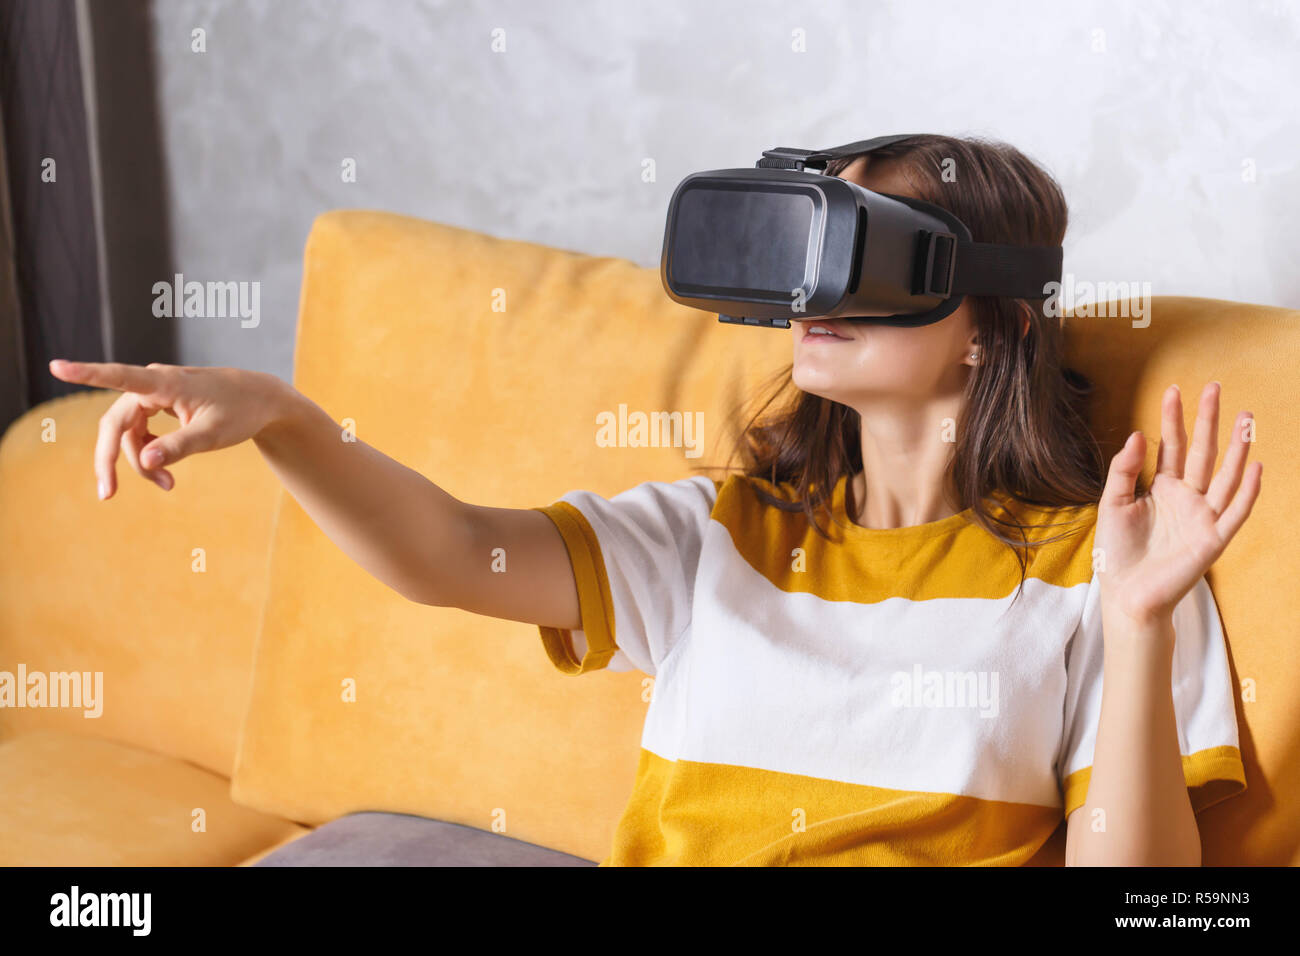 Attractive Long Haired Girl In Pullover Gesturing While Testing Vr Device She Sitting On The